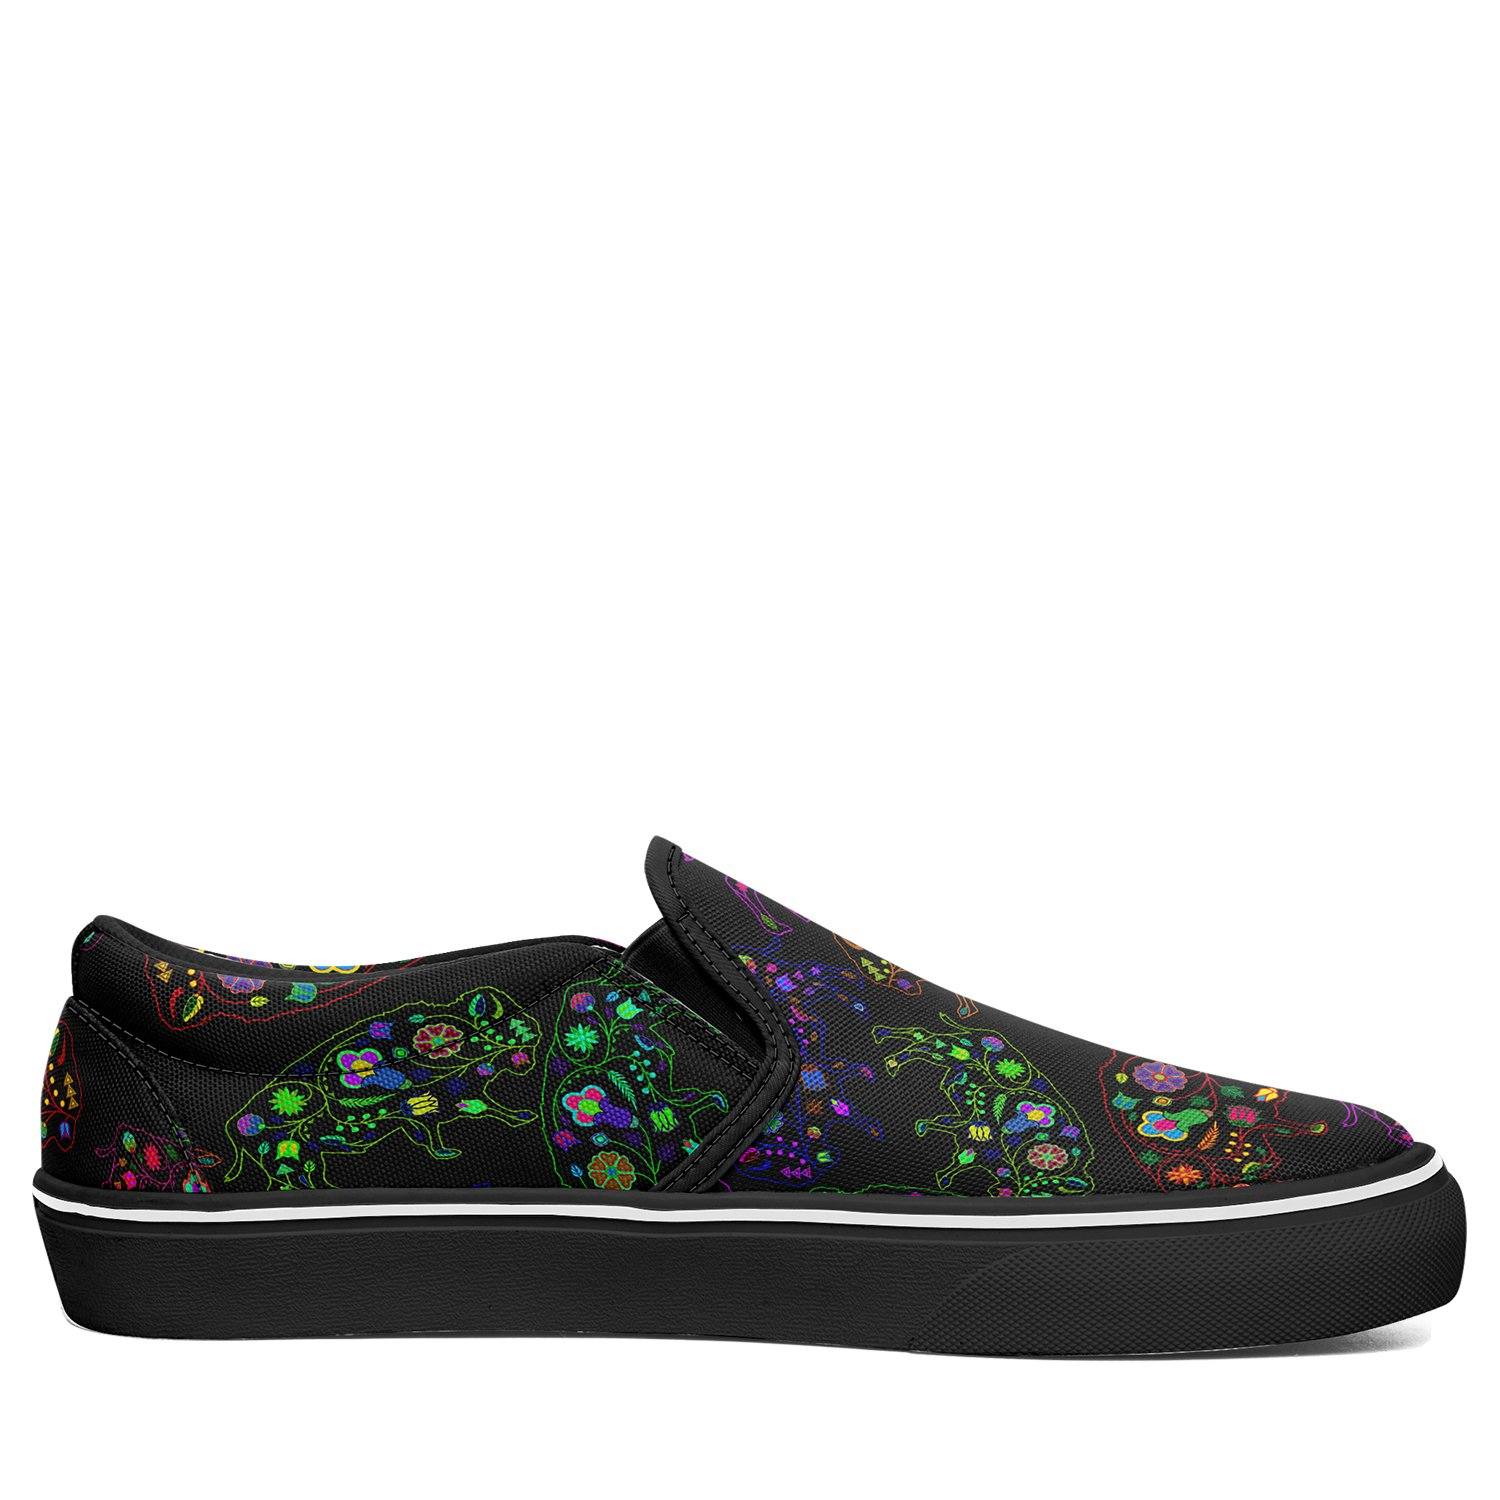 Floral Buffalo Otoyimm Canvas Slip On Shoes otoyimm Herman 